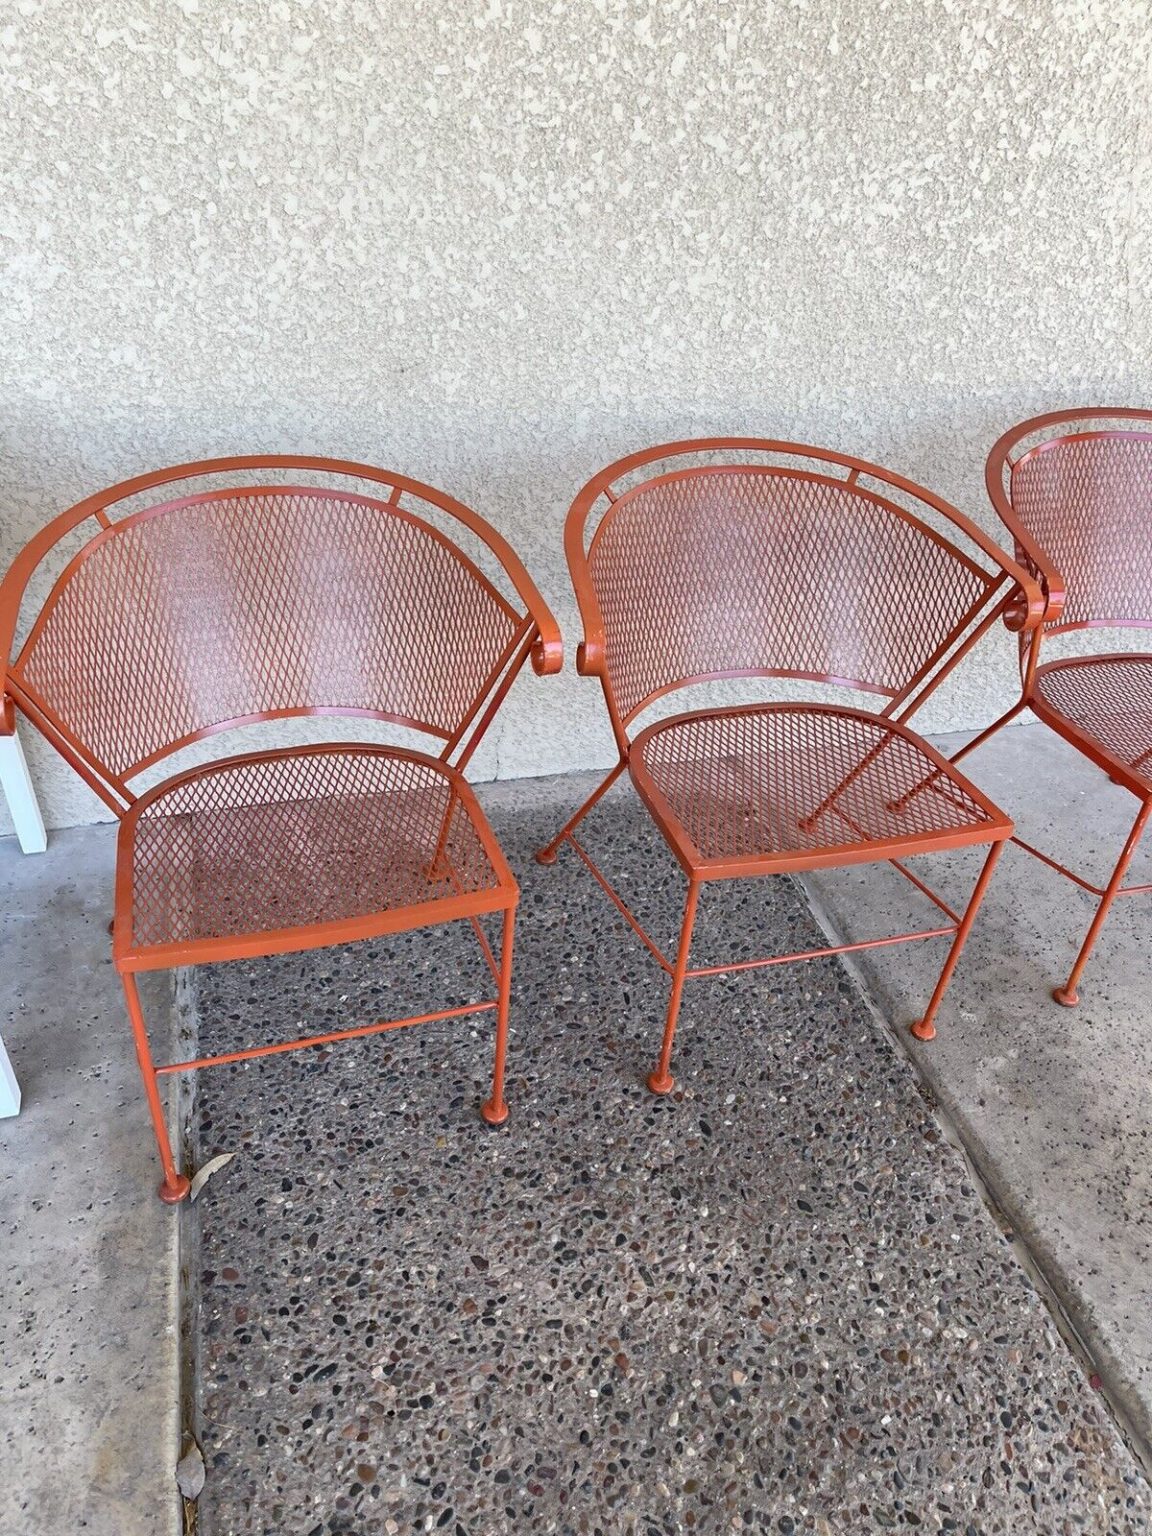 4 Vintage Iron Patio Chairs front